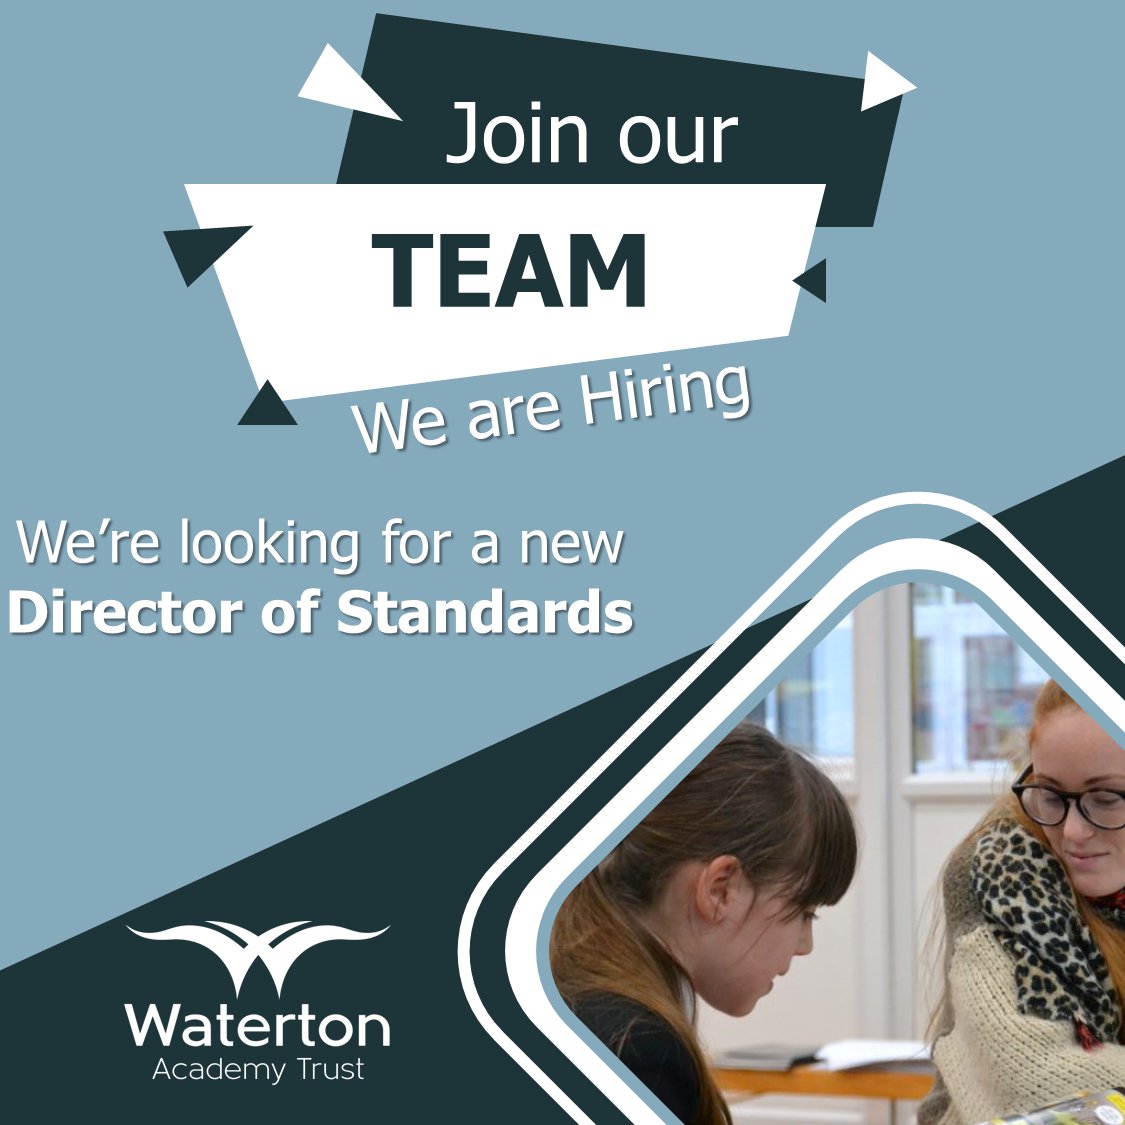 📚Passionate about maintaining high standards in education? 🔎Waterton Academy Trust seeks an experienced Director of Standards. 📍Be a part of our journey! 🔗For more information visit our site at: watertonacademytrust.org/recruitment/ #EducationCareers #SchoolLeadership